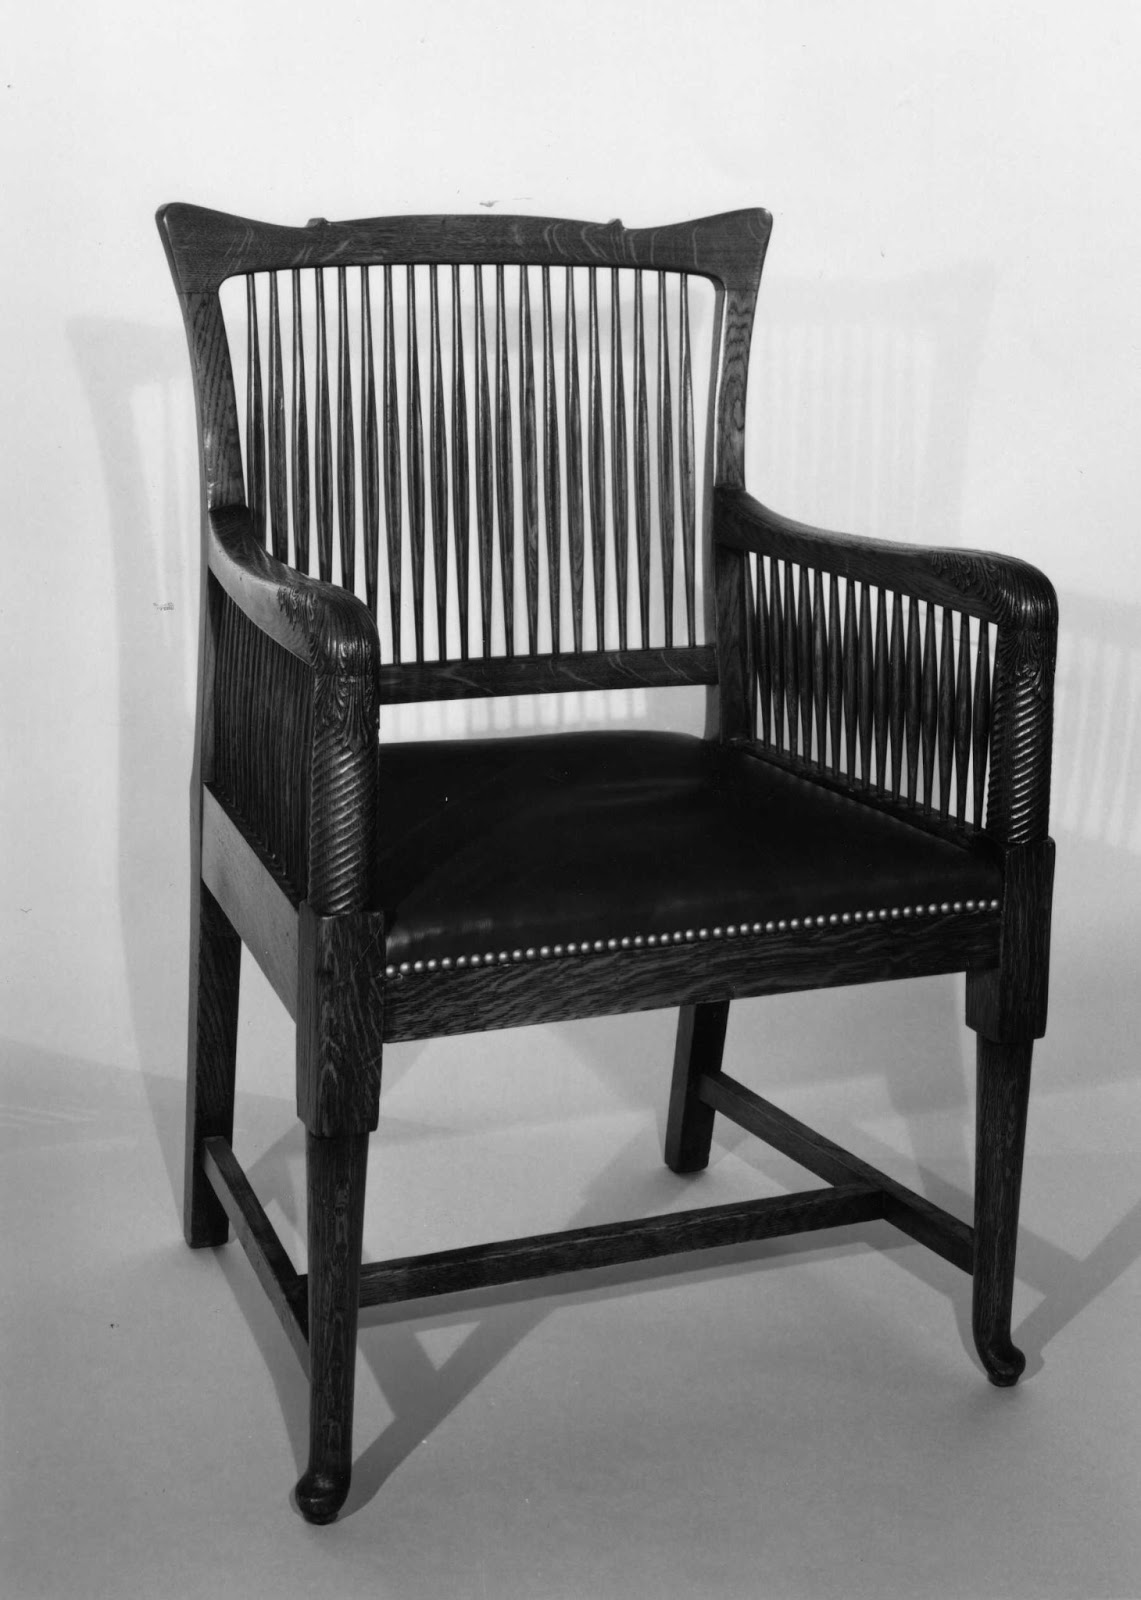 The Story Of A House Glessner House Dining Room Chairs